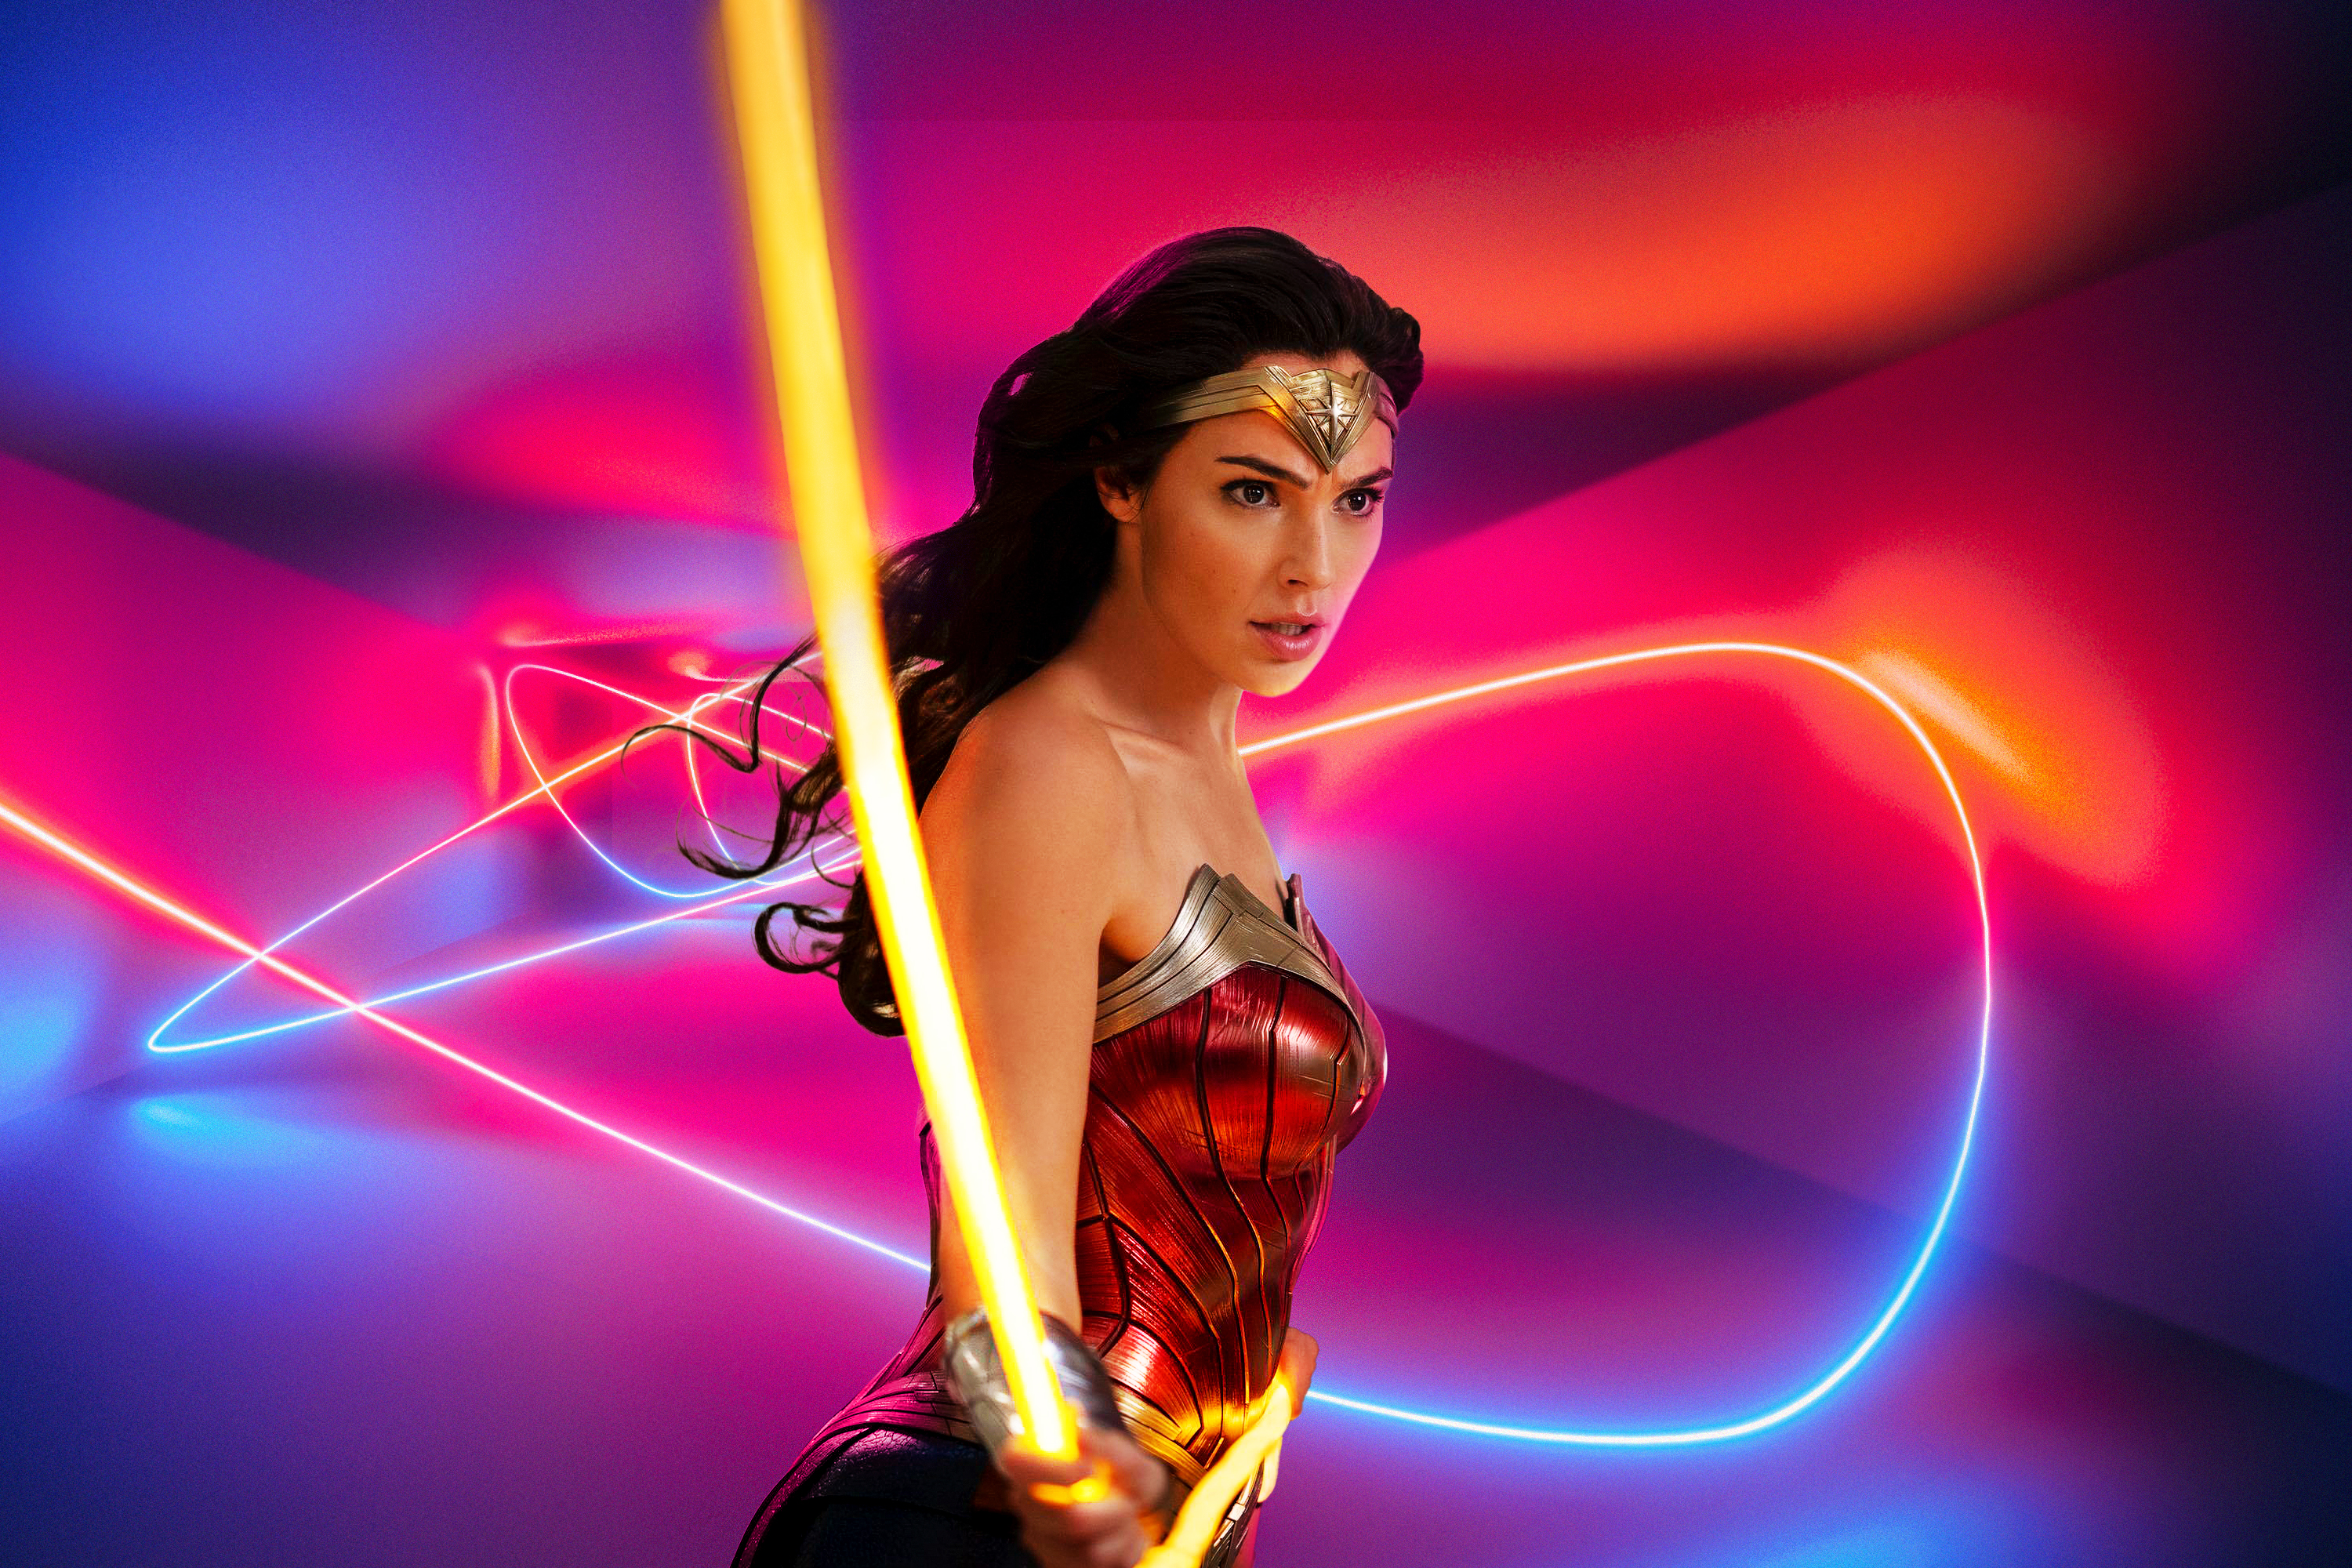 Gal Gadot as Diana flipping her lasso of truth in Wonder Woman 1984, on a blue, red, and purple background